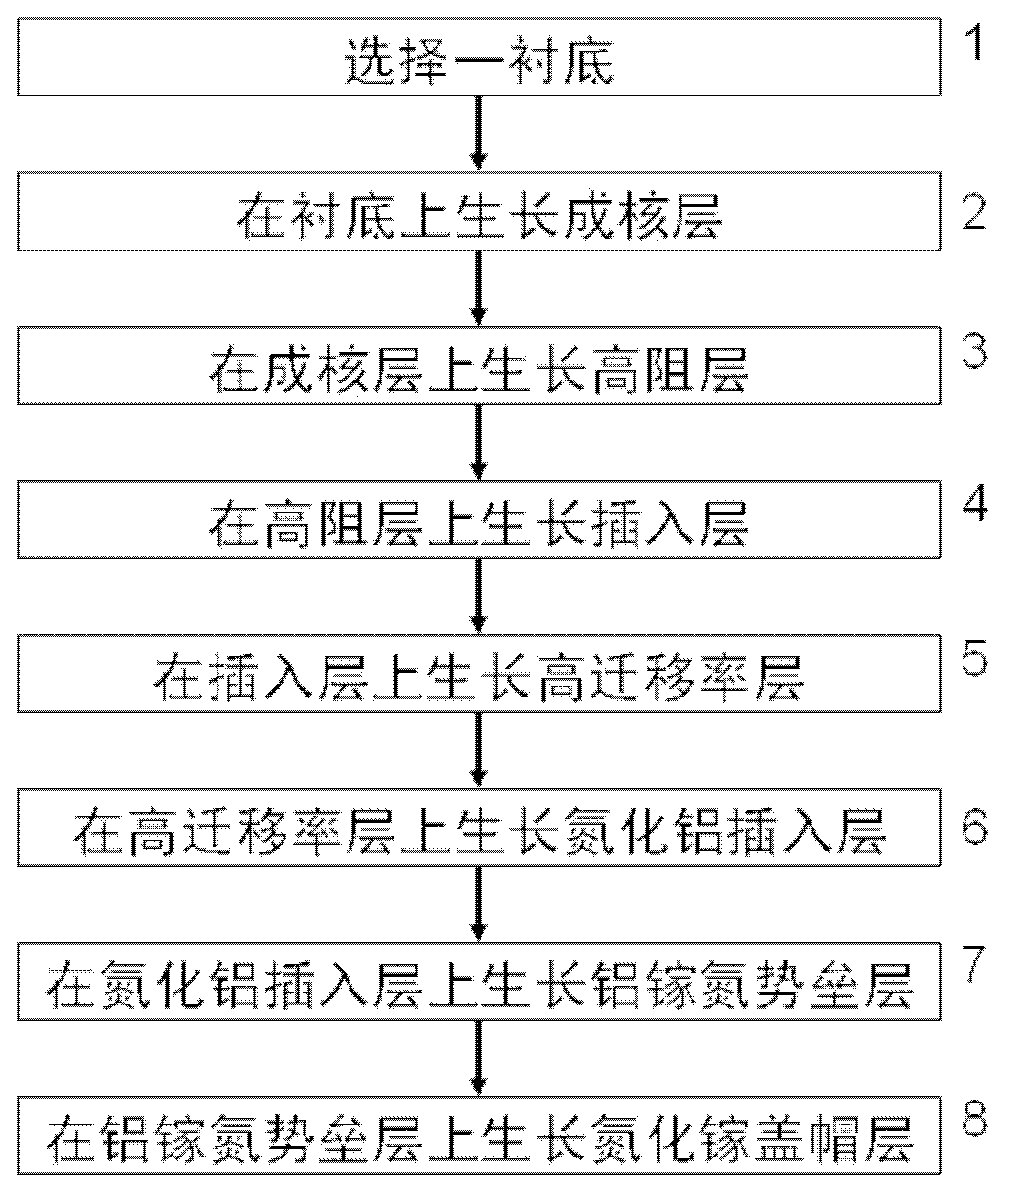 Double-heterostructure GaN-based high-electron mobility transistor structure and preparation method